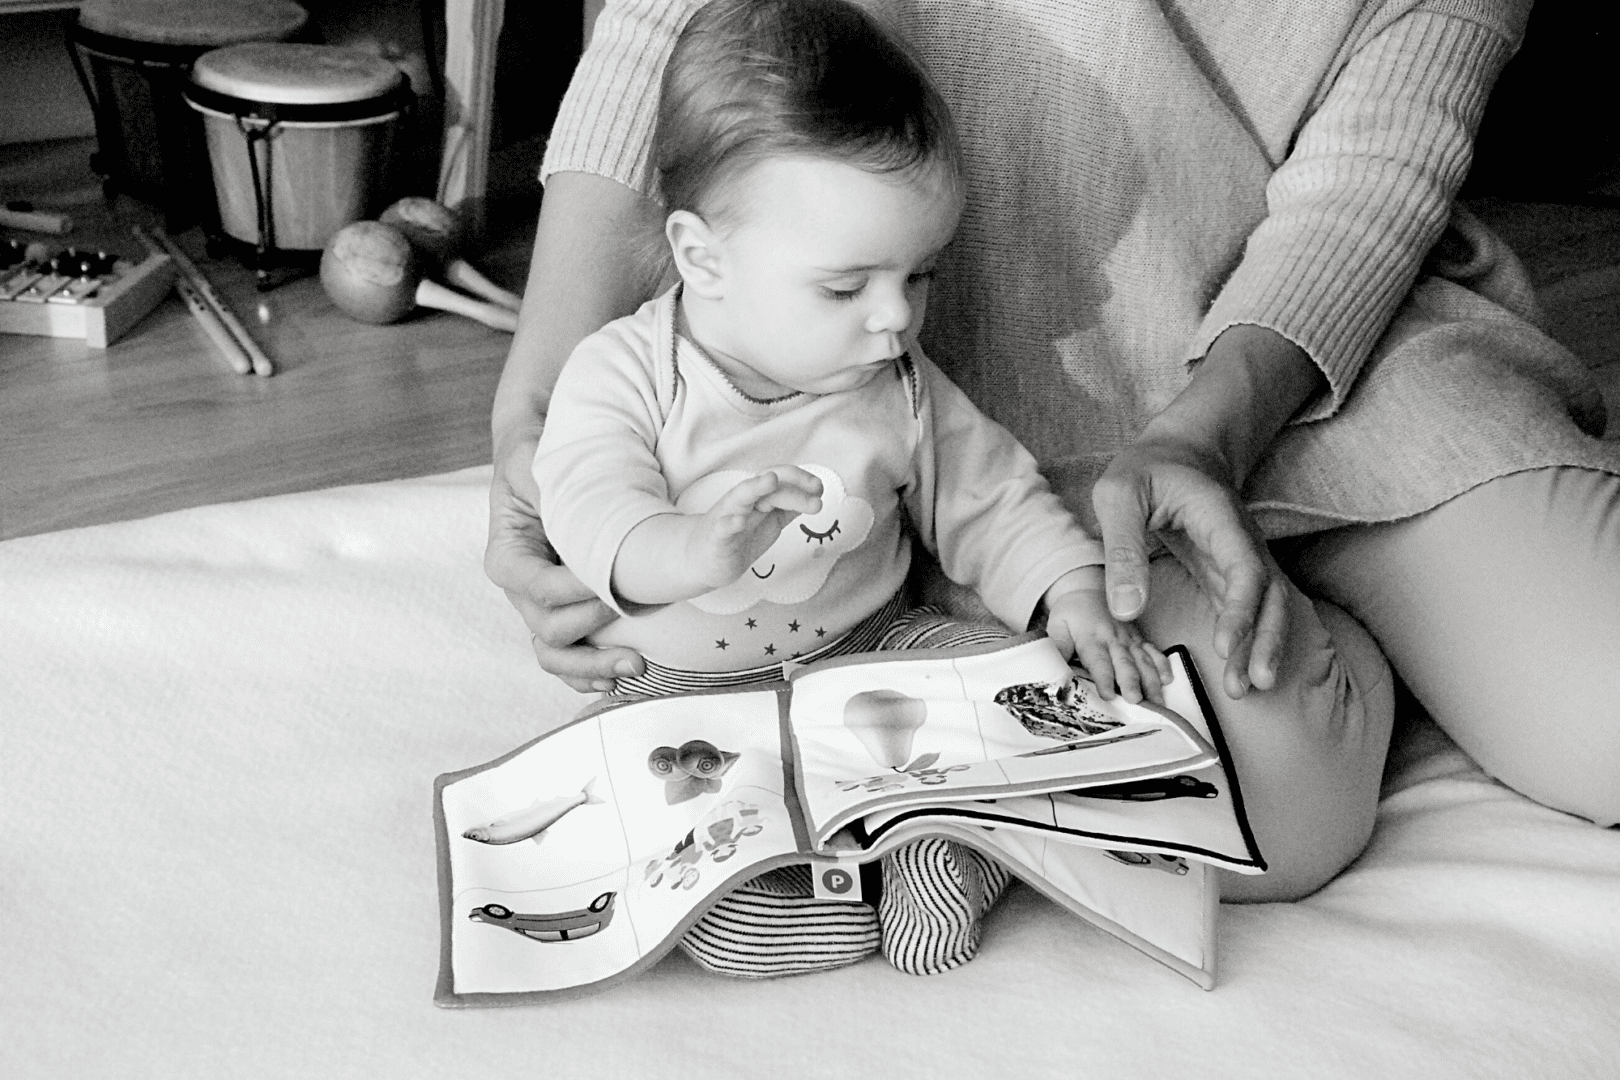 A woman reading a book to a baby.